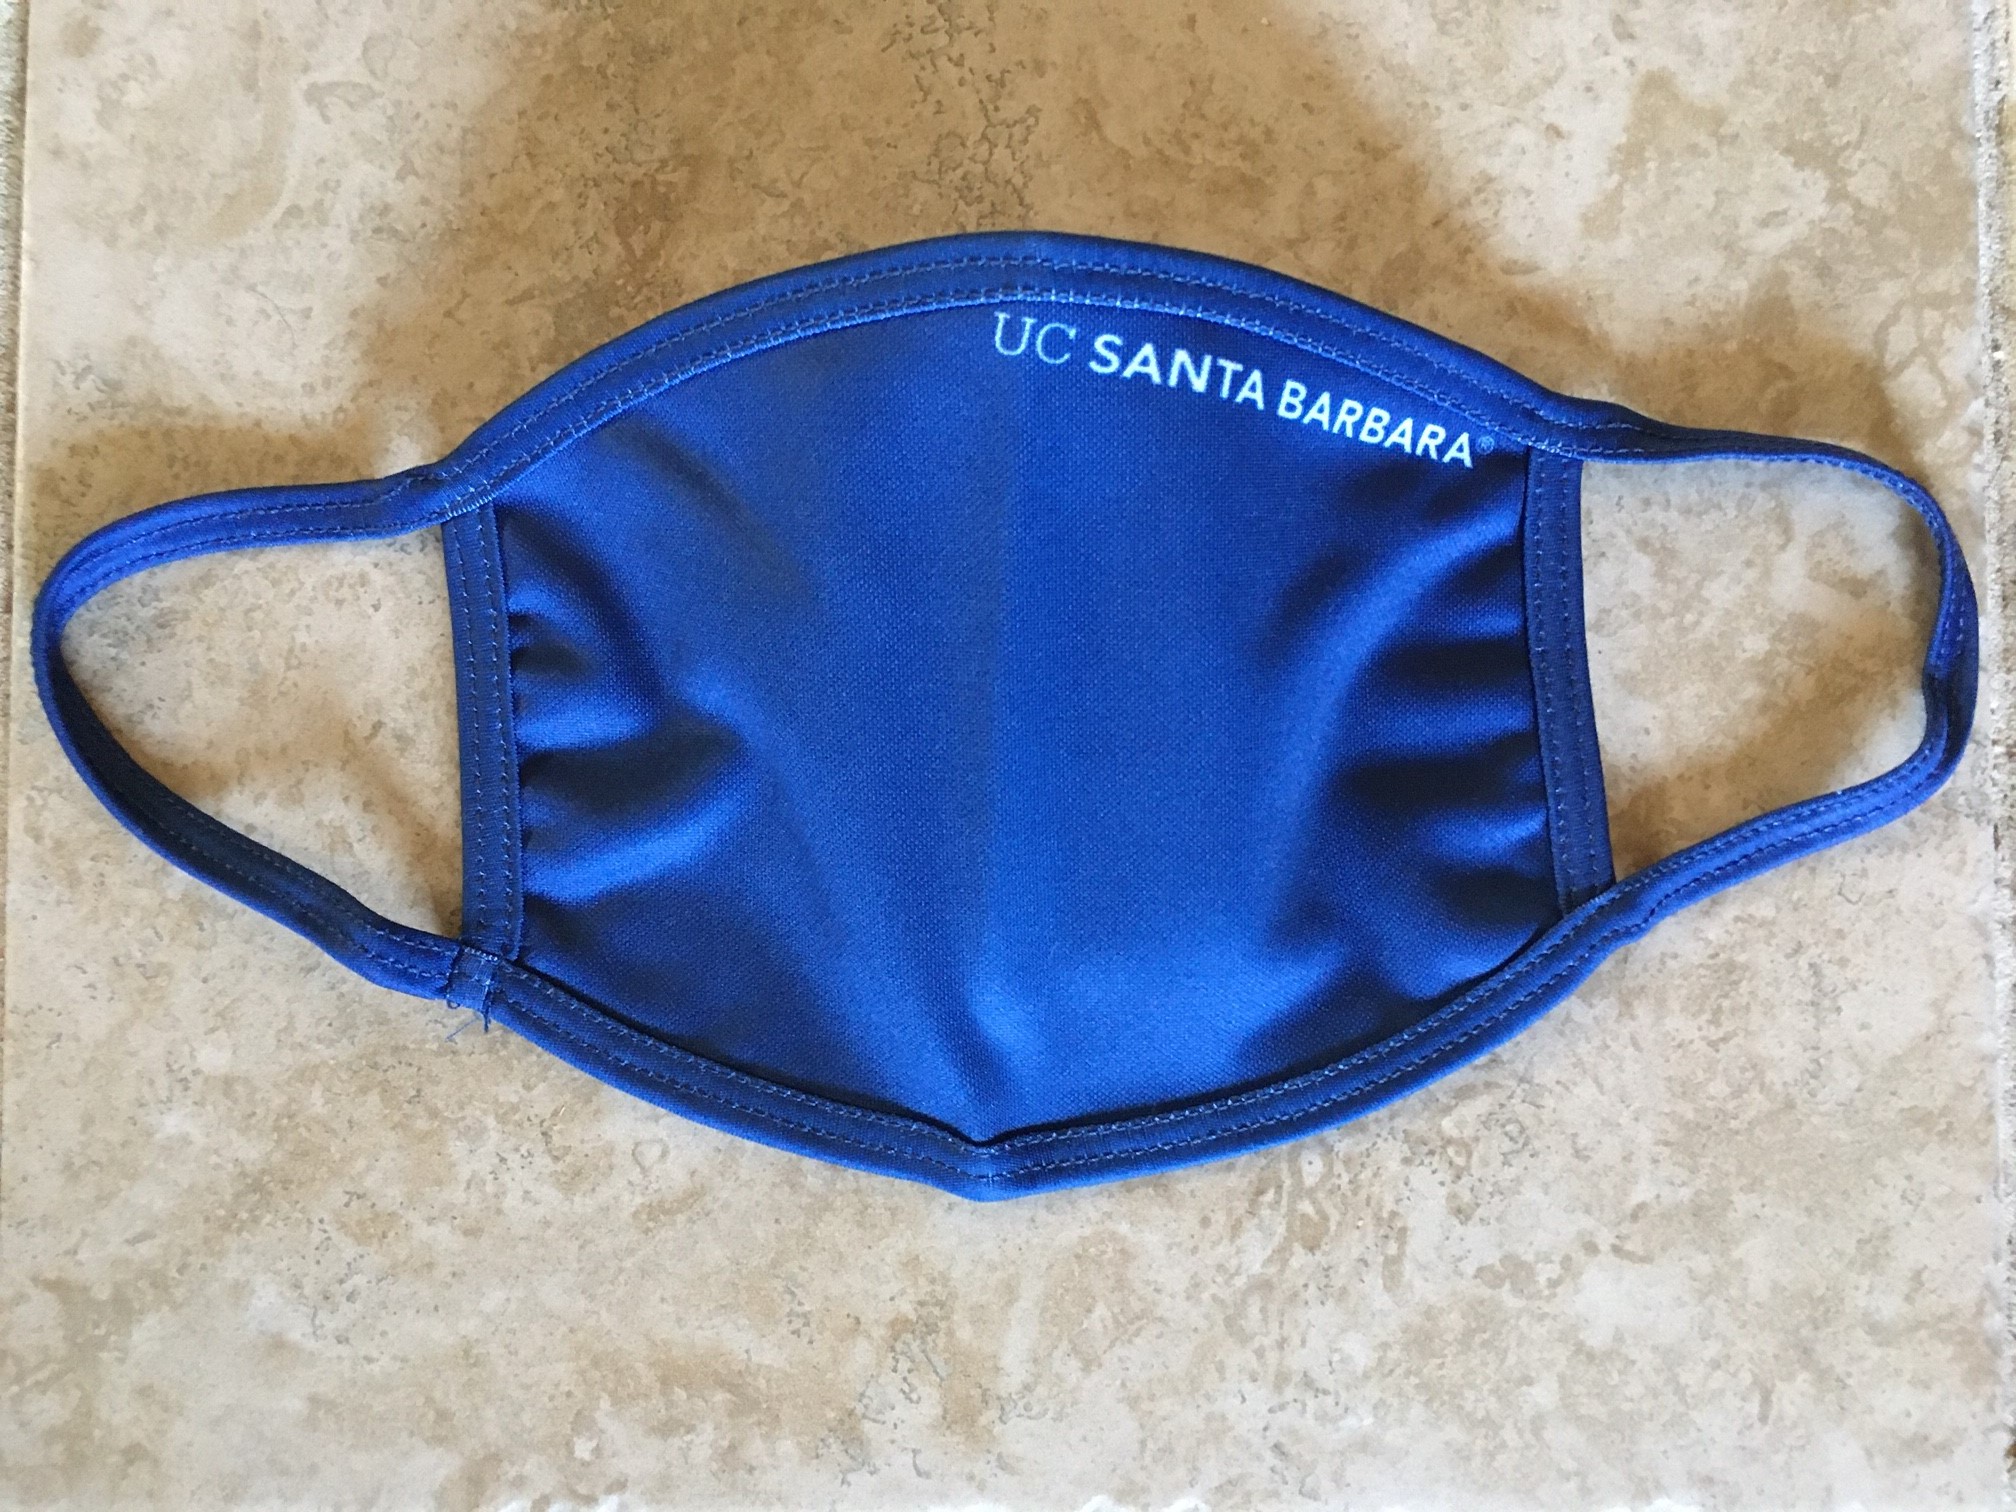 A blue facemask with the text "UC Santa Barbara" on it